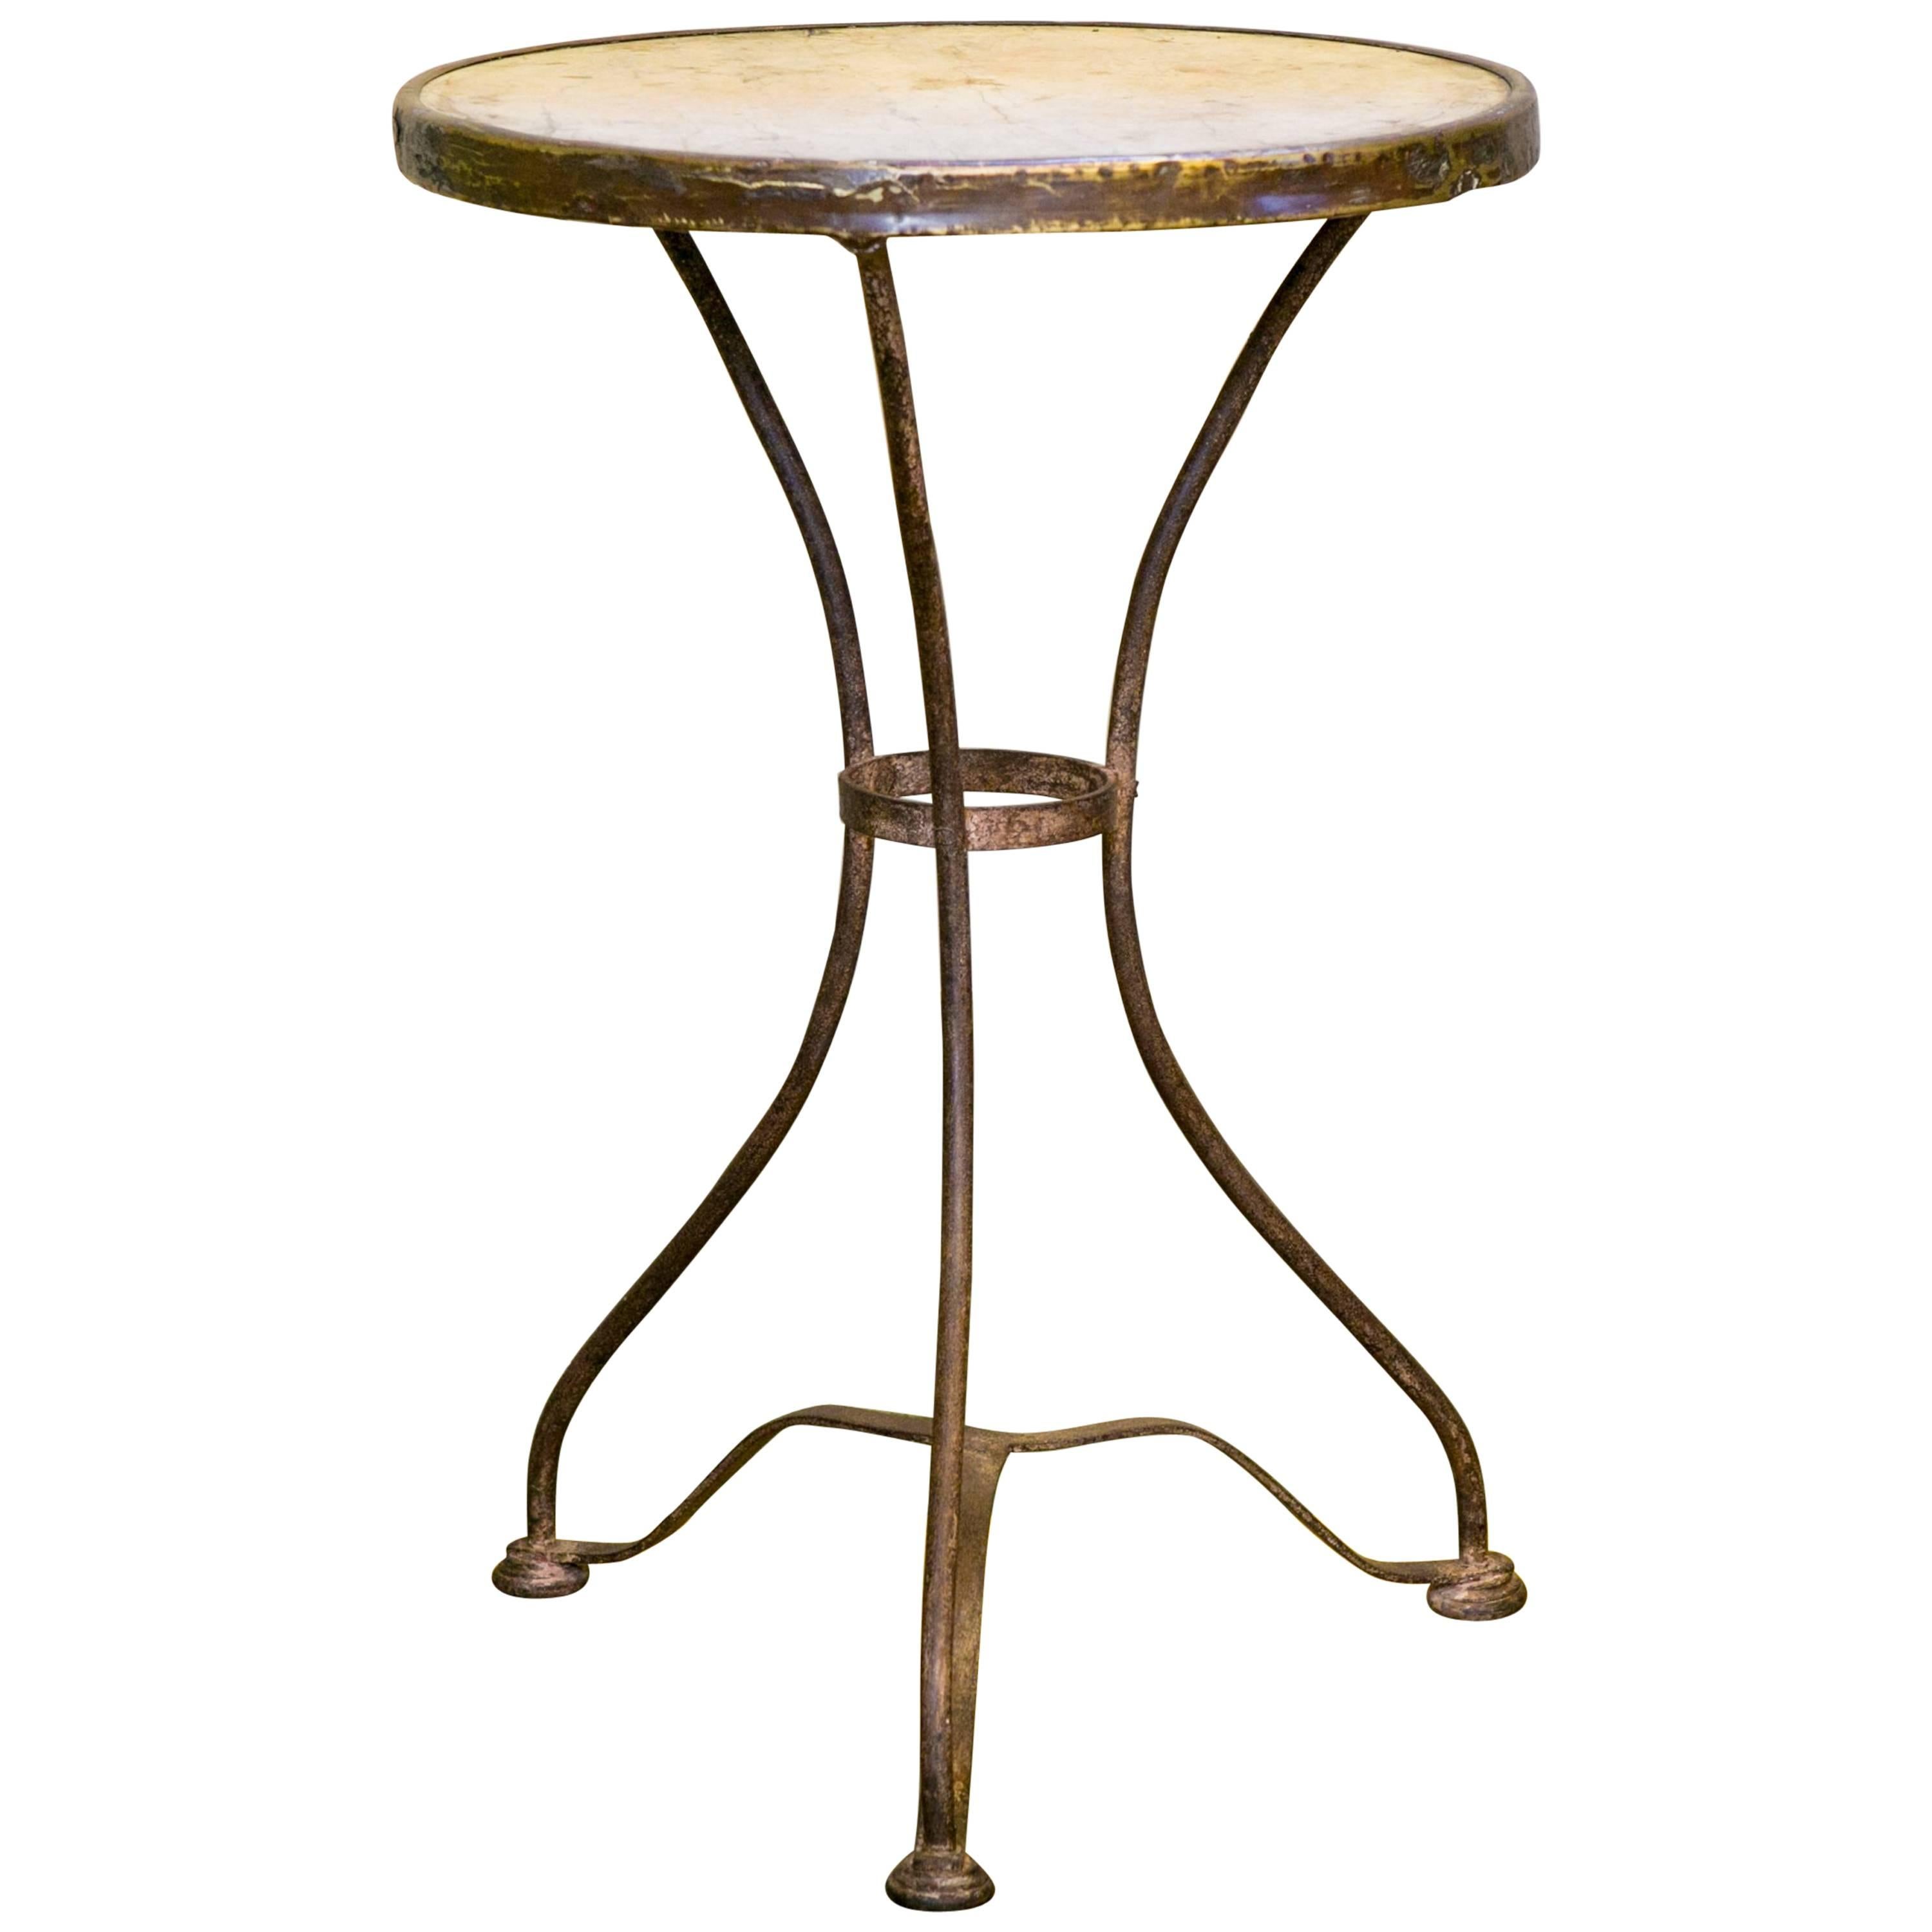 Marble-Top French Iron Bistro Table with Brass Band, circa 1910